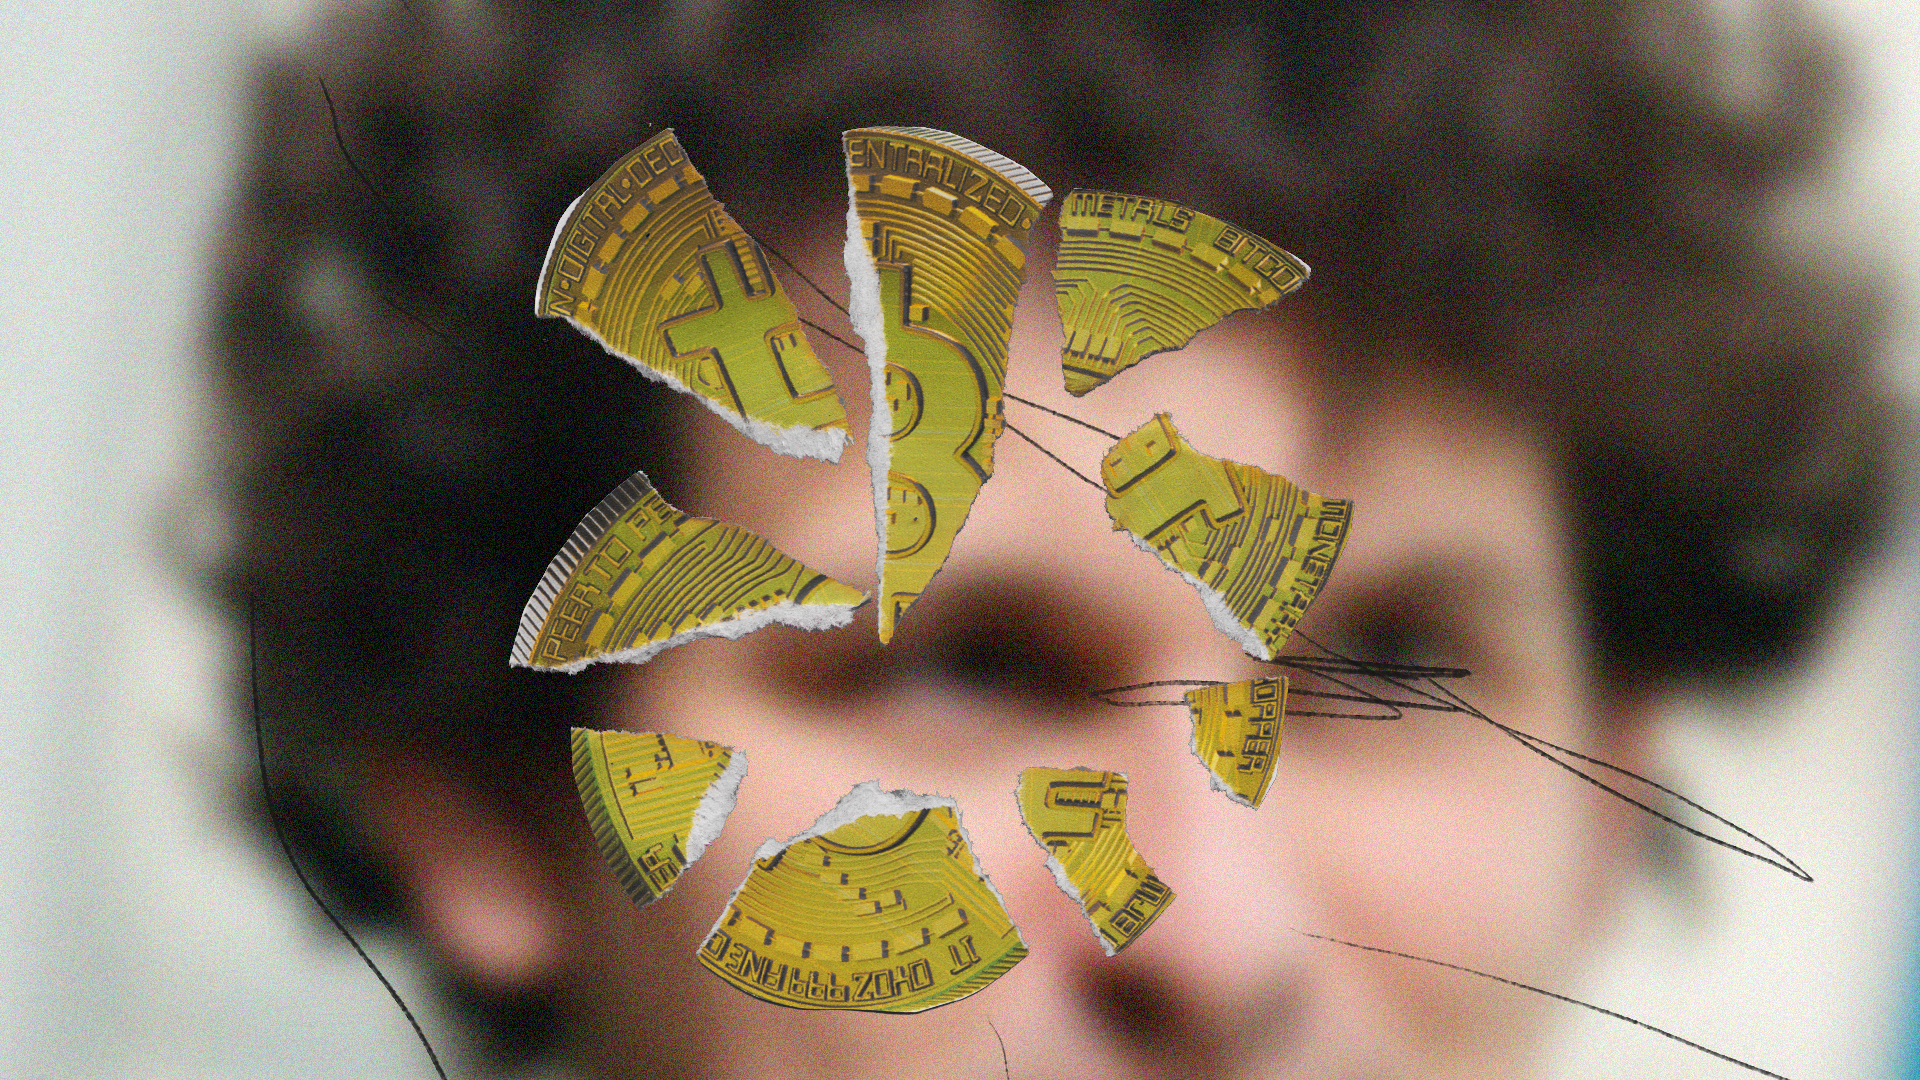 An image of Sam Bankman-Fried’s face, blurry, behind the shards of a bitcoin.